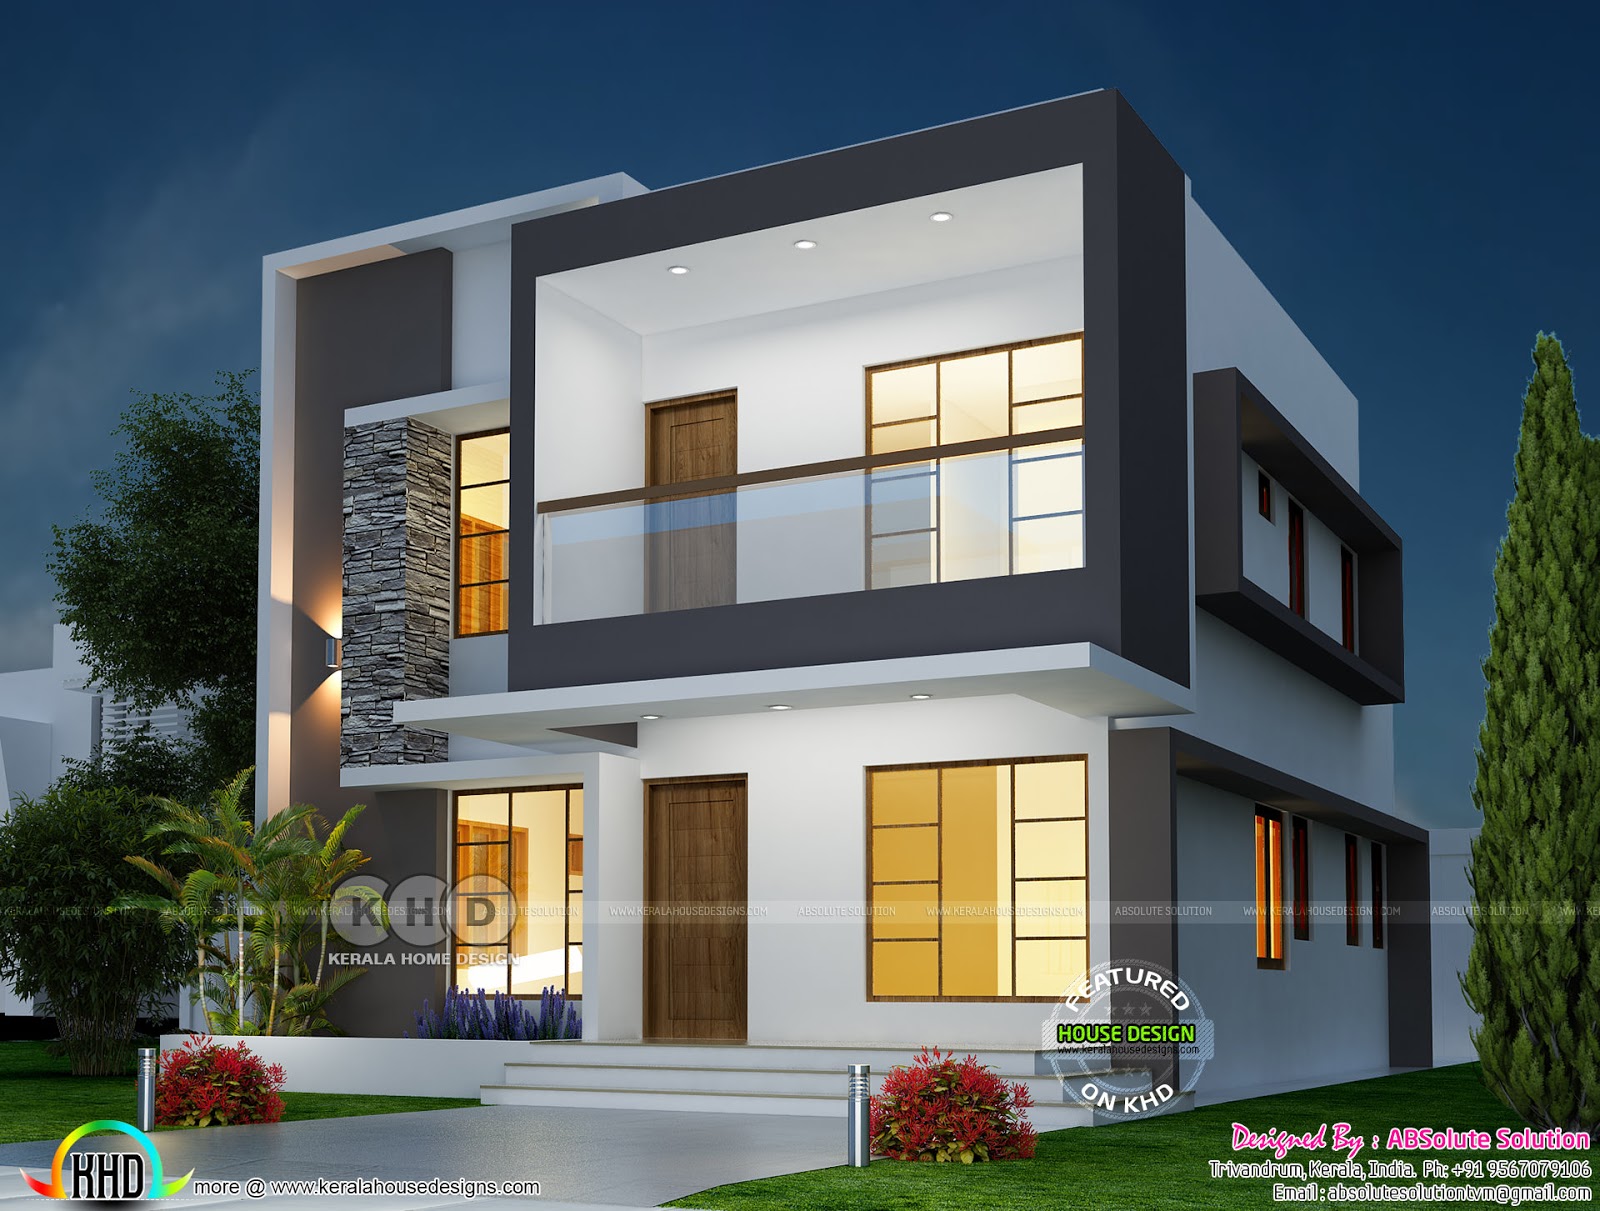 Prominent Miljard optocht ₹1900 Per square feet cost 1600 sq-ft home - Kerala home design and floor  plans - 9K+ house designs